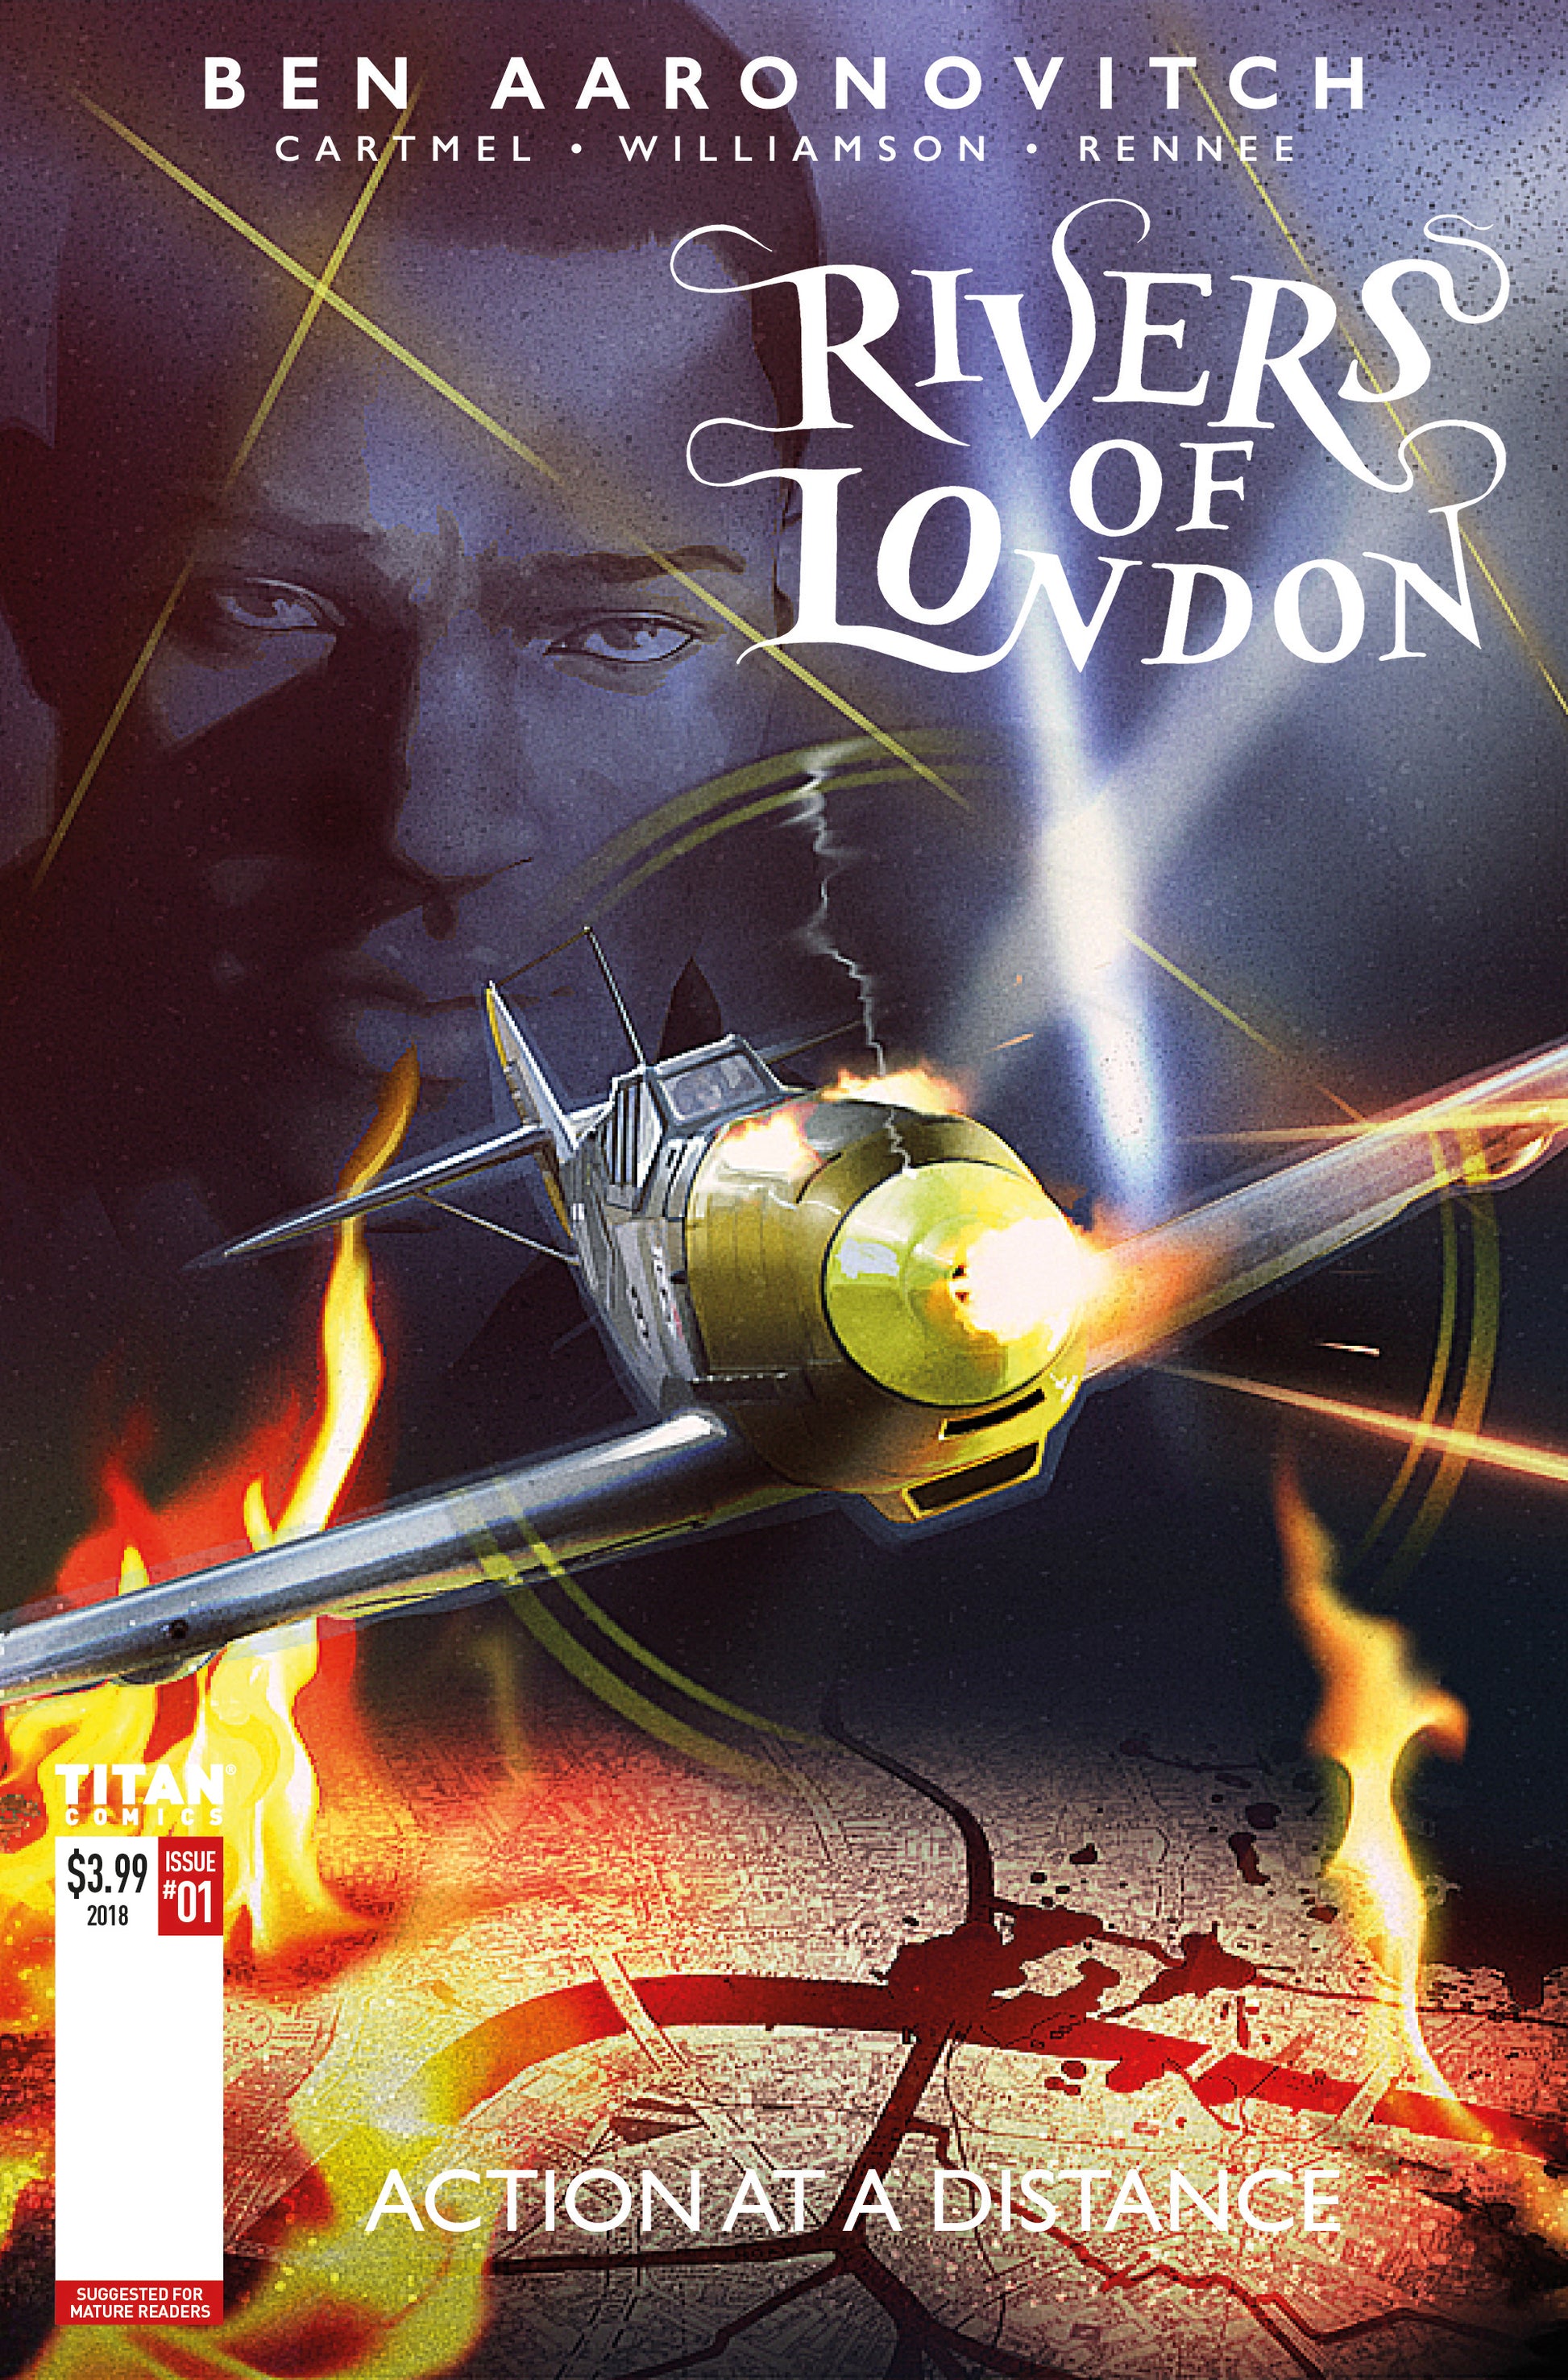 RIVERS OF LONDON #1 (OF 4) ACTION AT A DISTANCE (MR) COVER